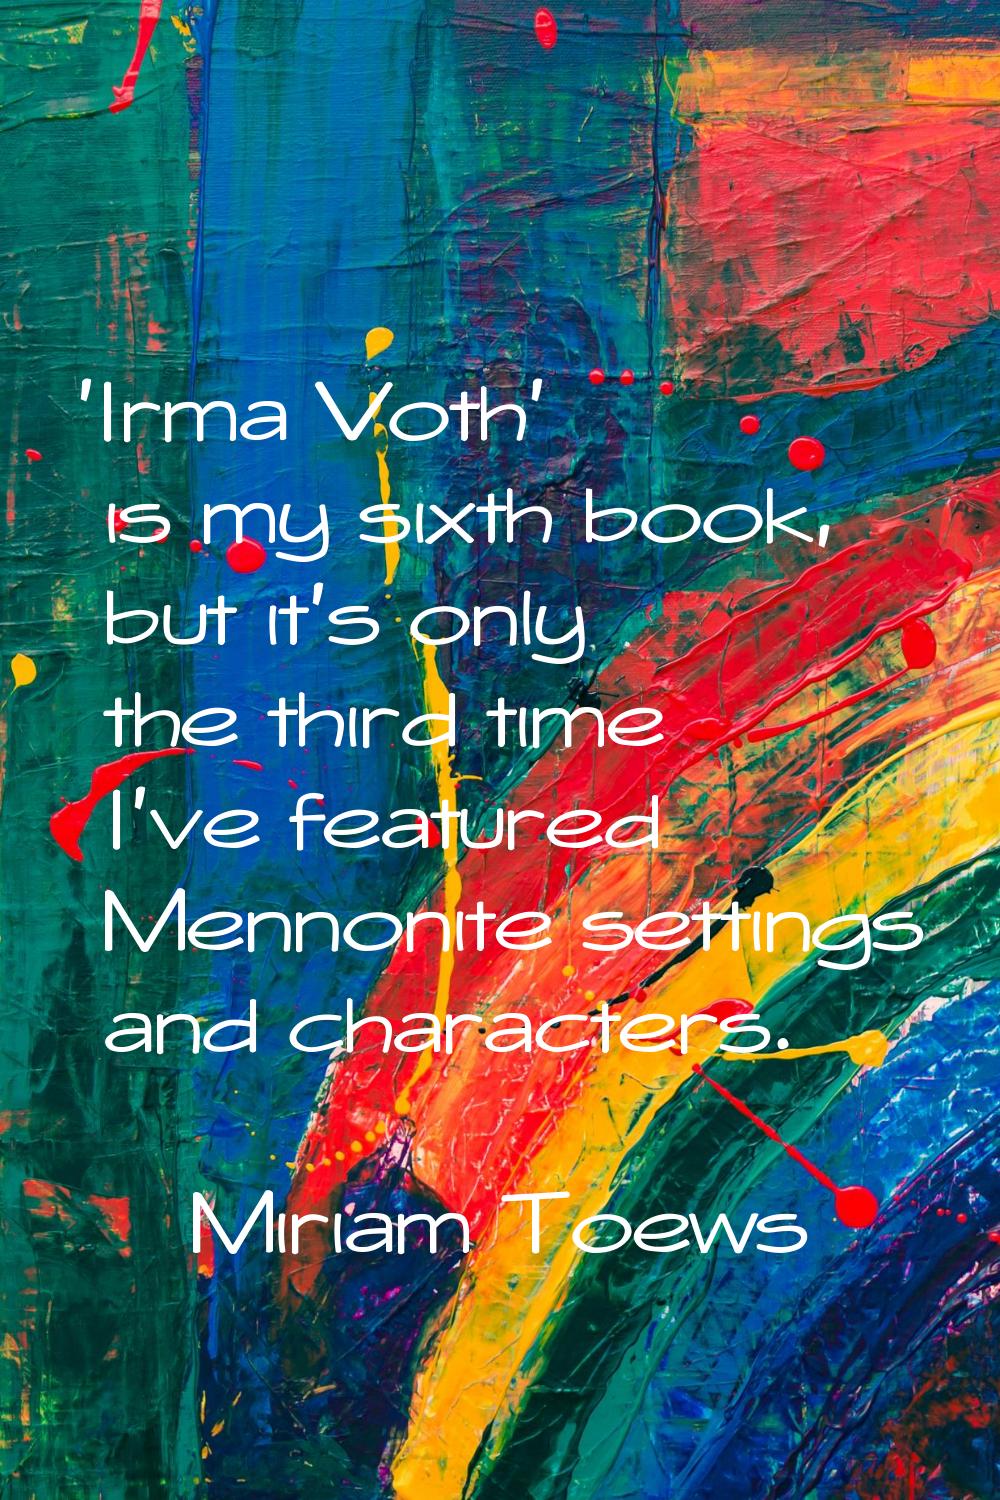 'Irma Voth' is my sixth book, but it's only the third time I've featured Mennonite settings and cha